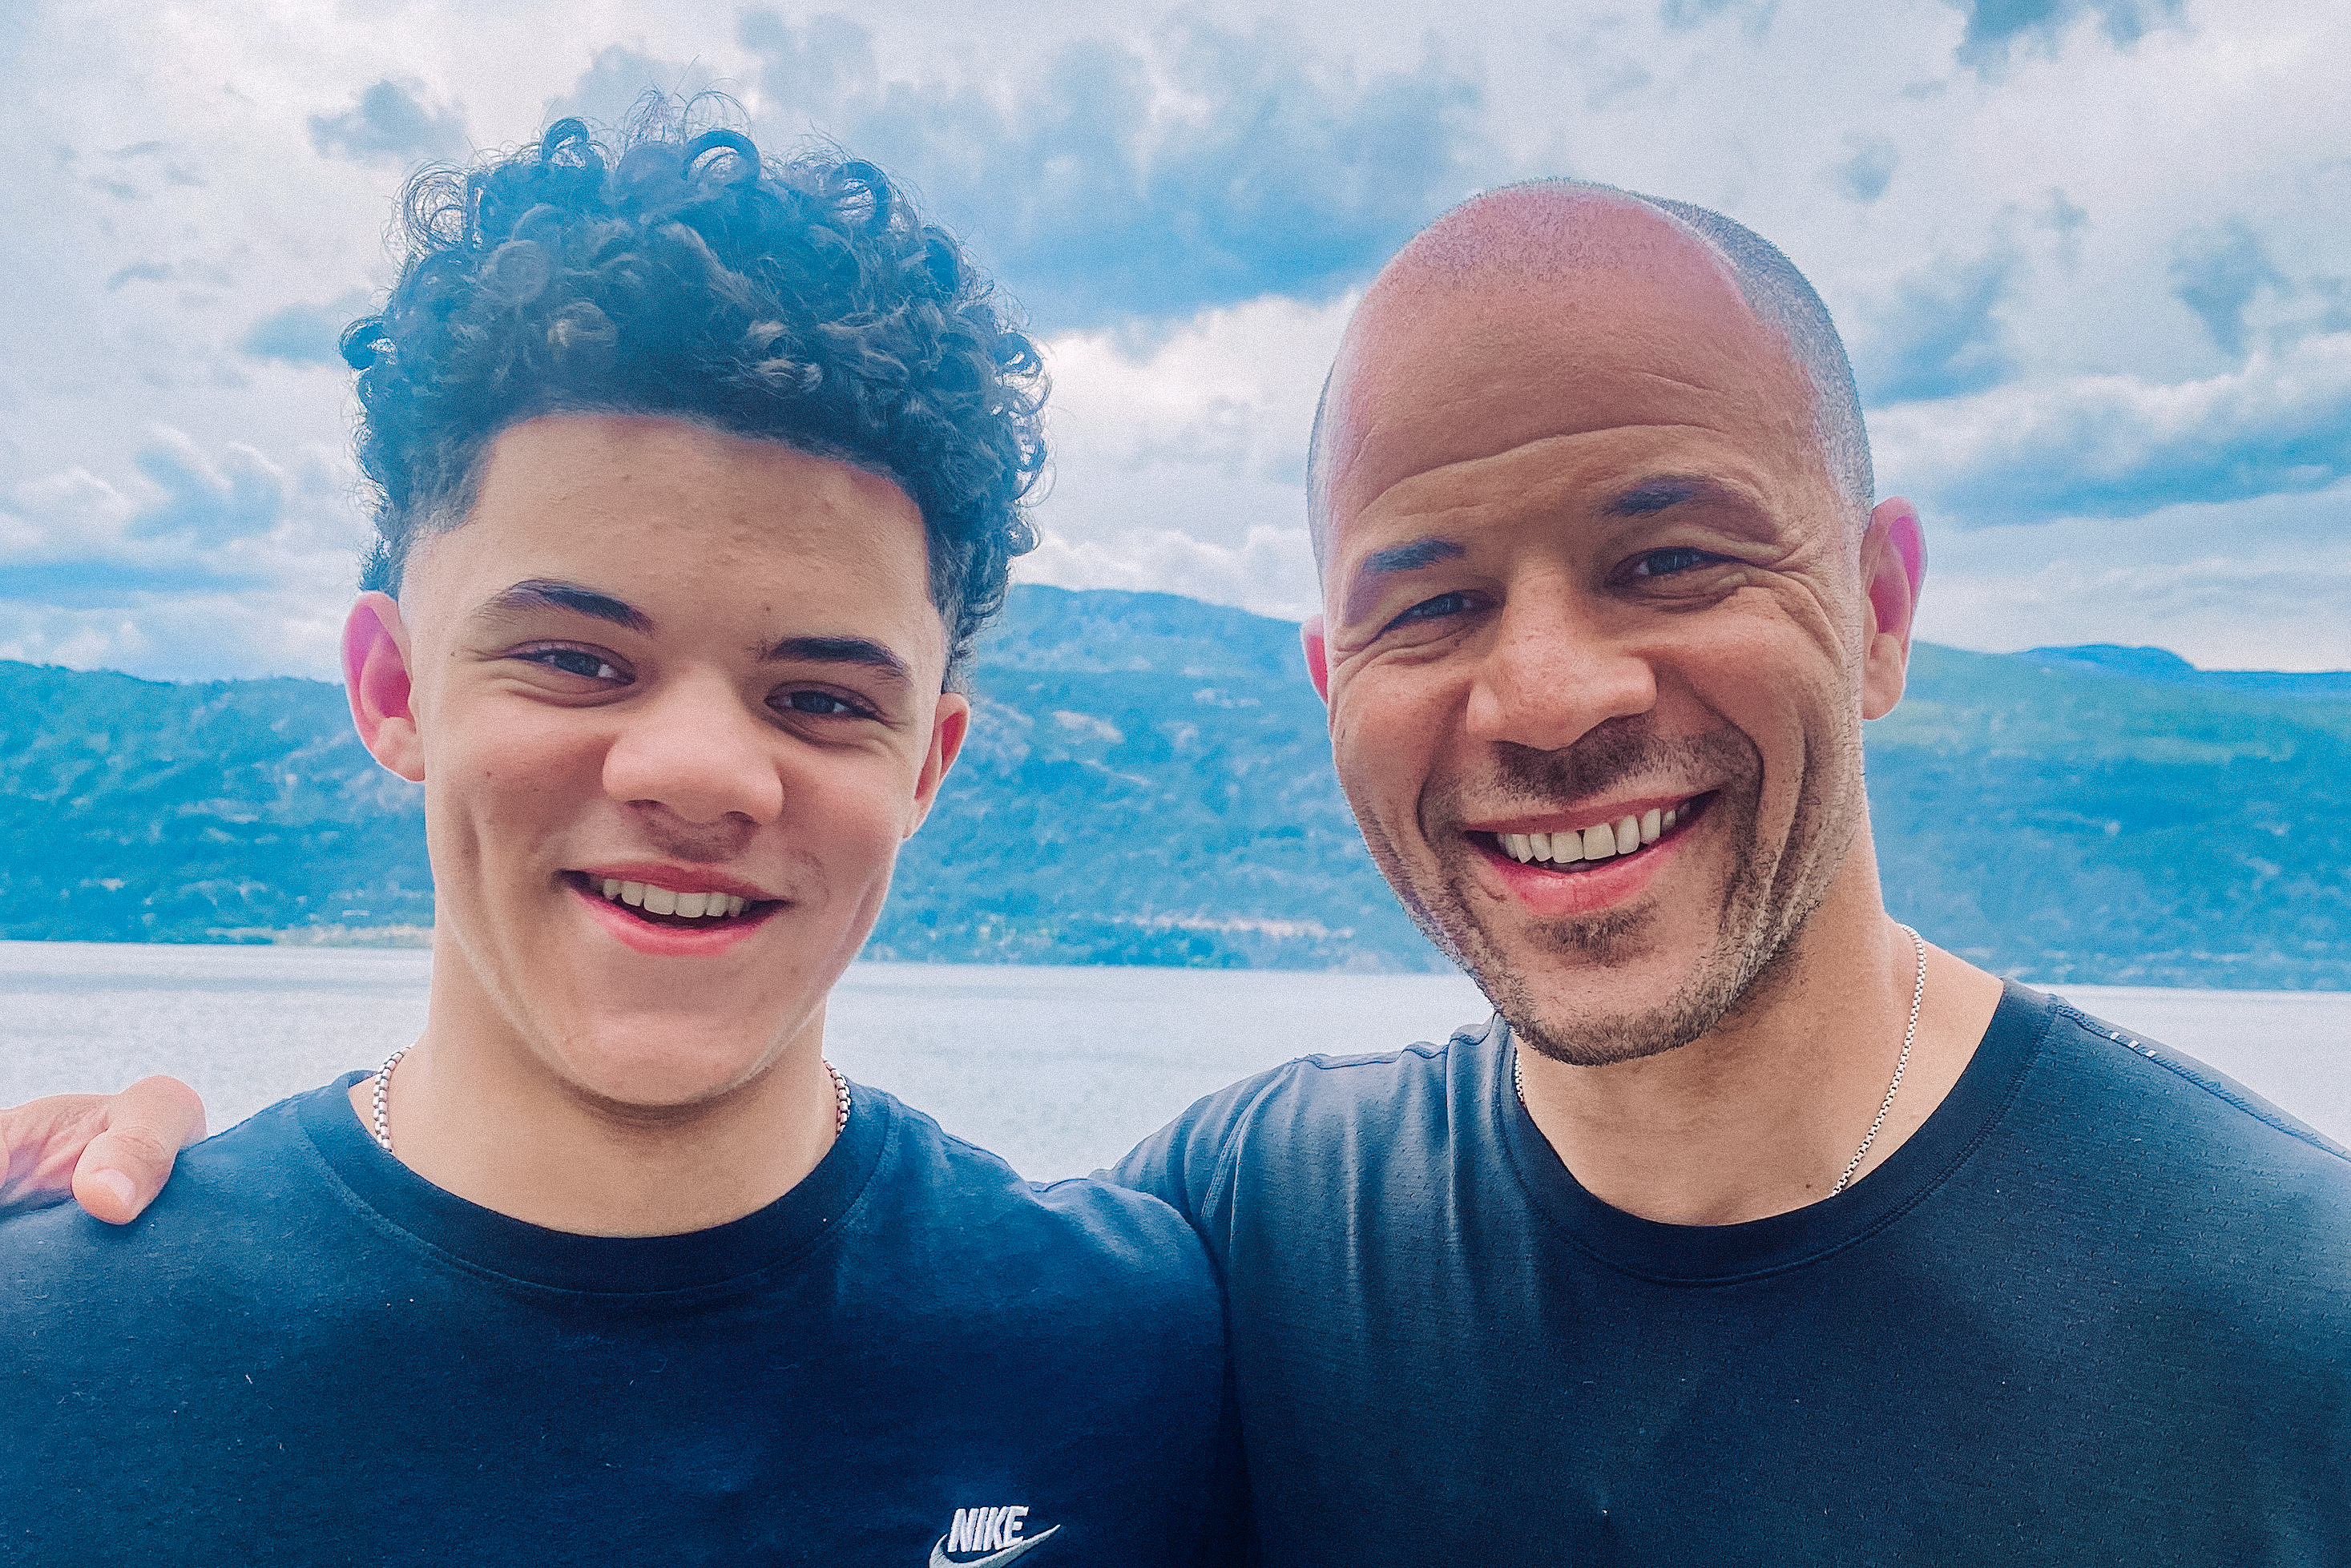 NHL legacies and hockey dads: How Jarome Iginla and Byron Ritchie are preparing for the draft